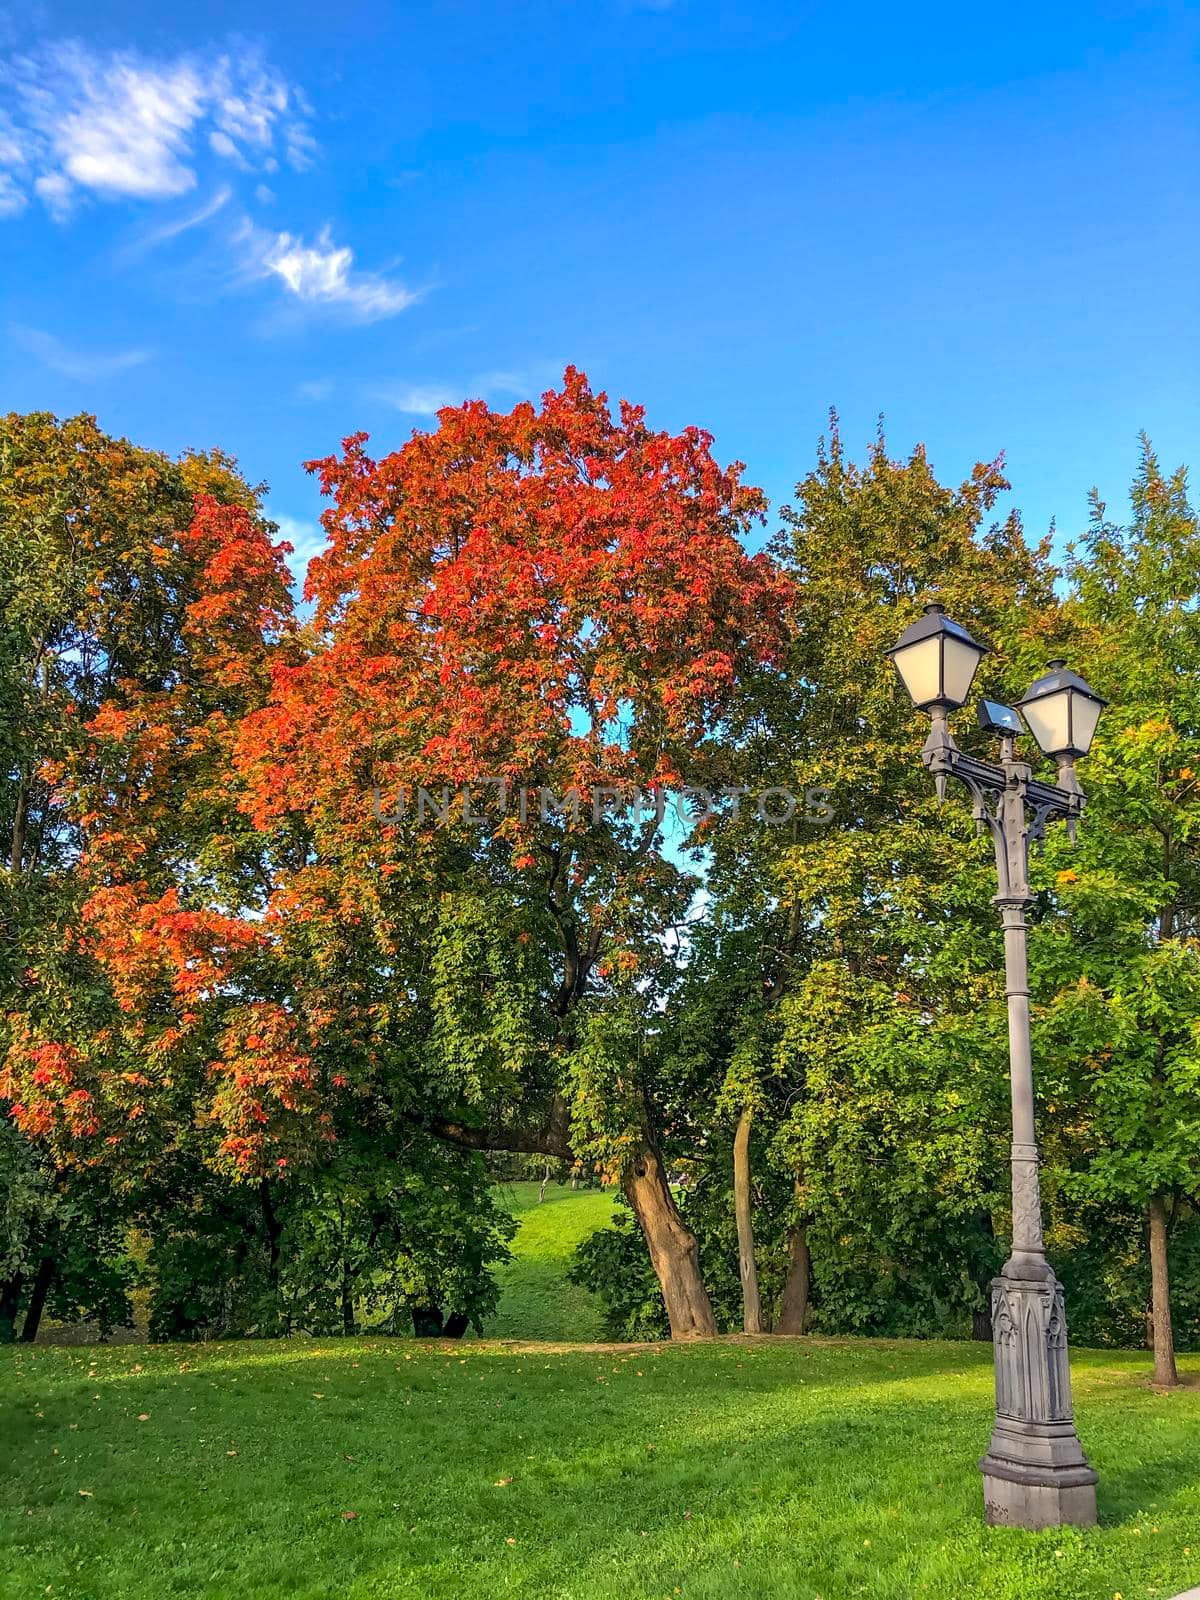 Colourful Nature: Autumn Beauty in the Park - stock photo. High quality photo